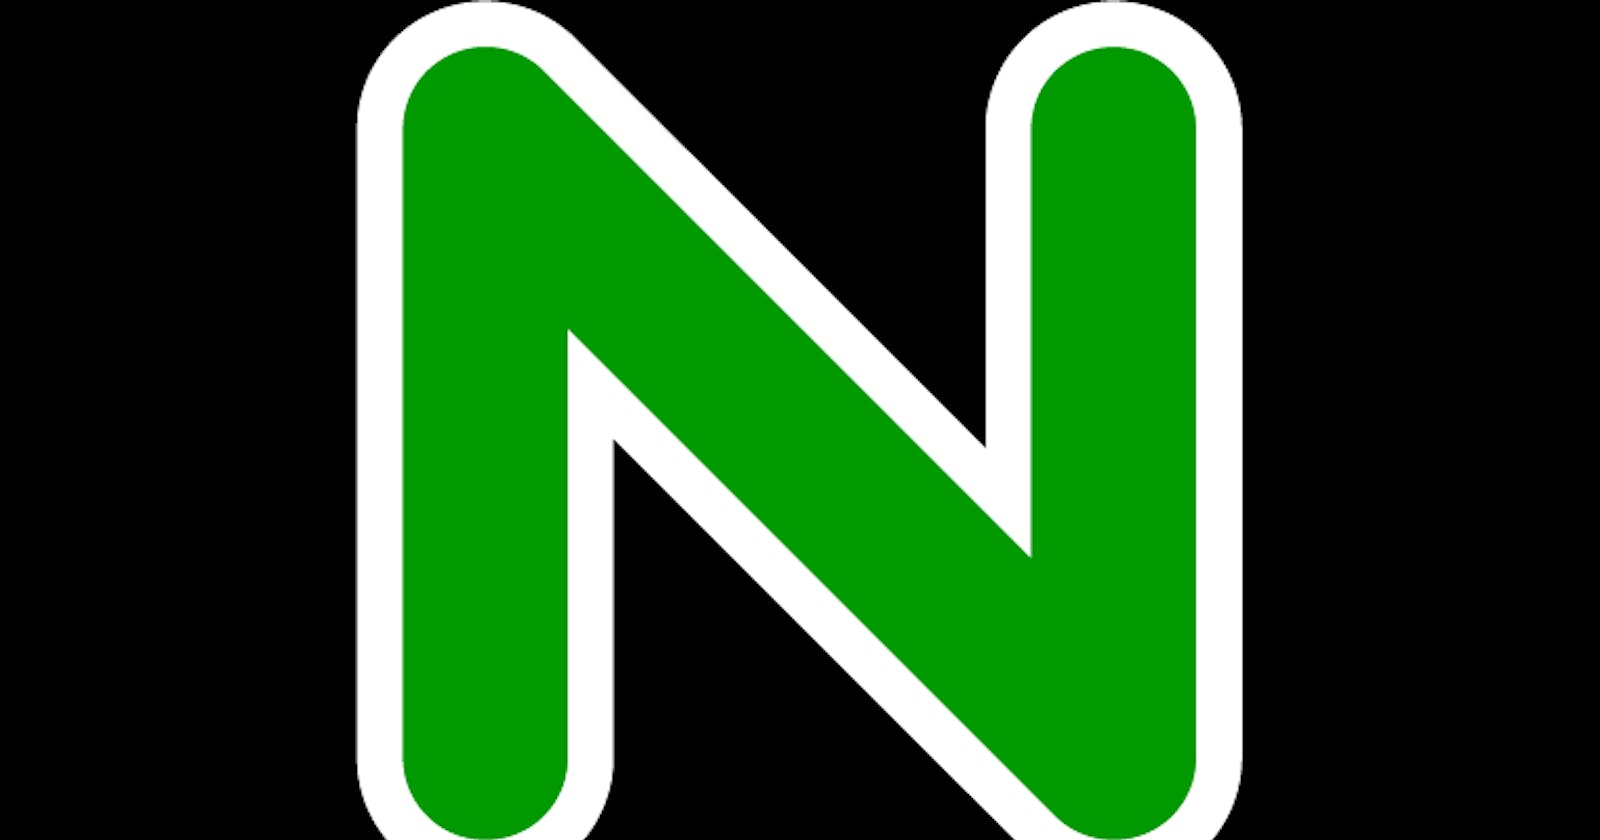 Nginx: TLS without LUCKY13